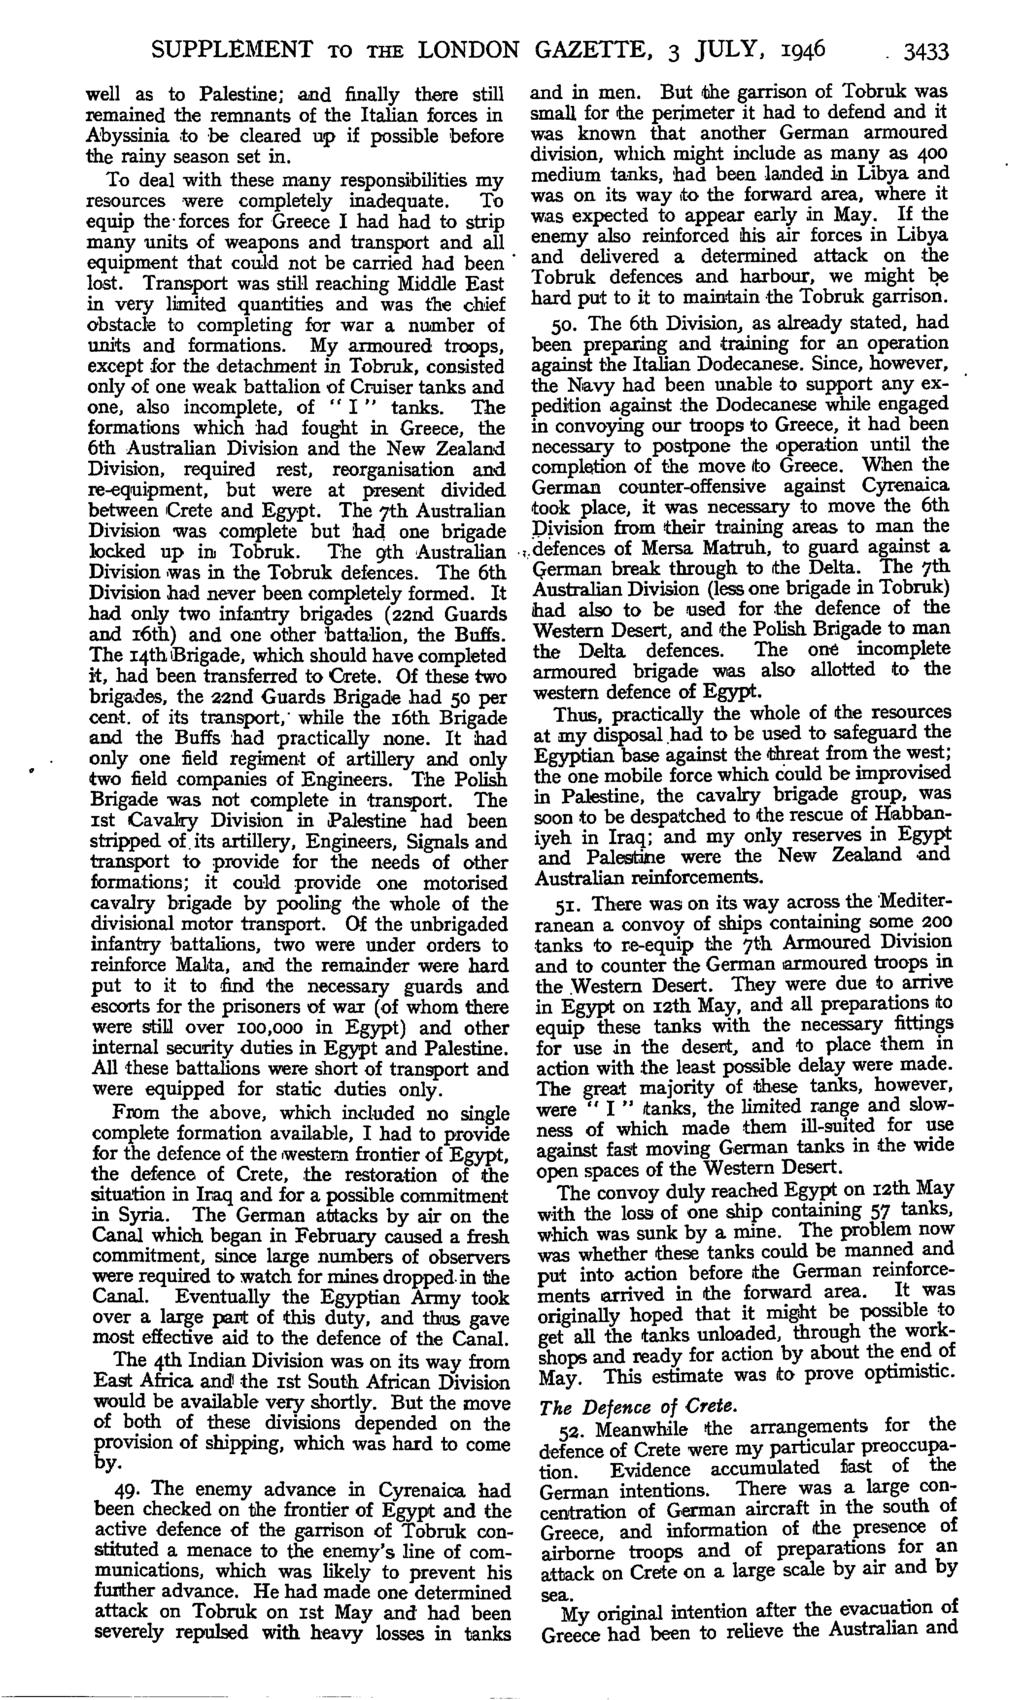 SUPPLEMENT TO THE LONDON GAZETTE, 3 JULY, 1946 3433 well as to Palestine; and finally there still remained the remnants of the Itah'an forces in Abyssinia to be cleared up if possible before the